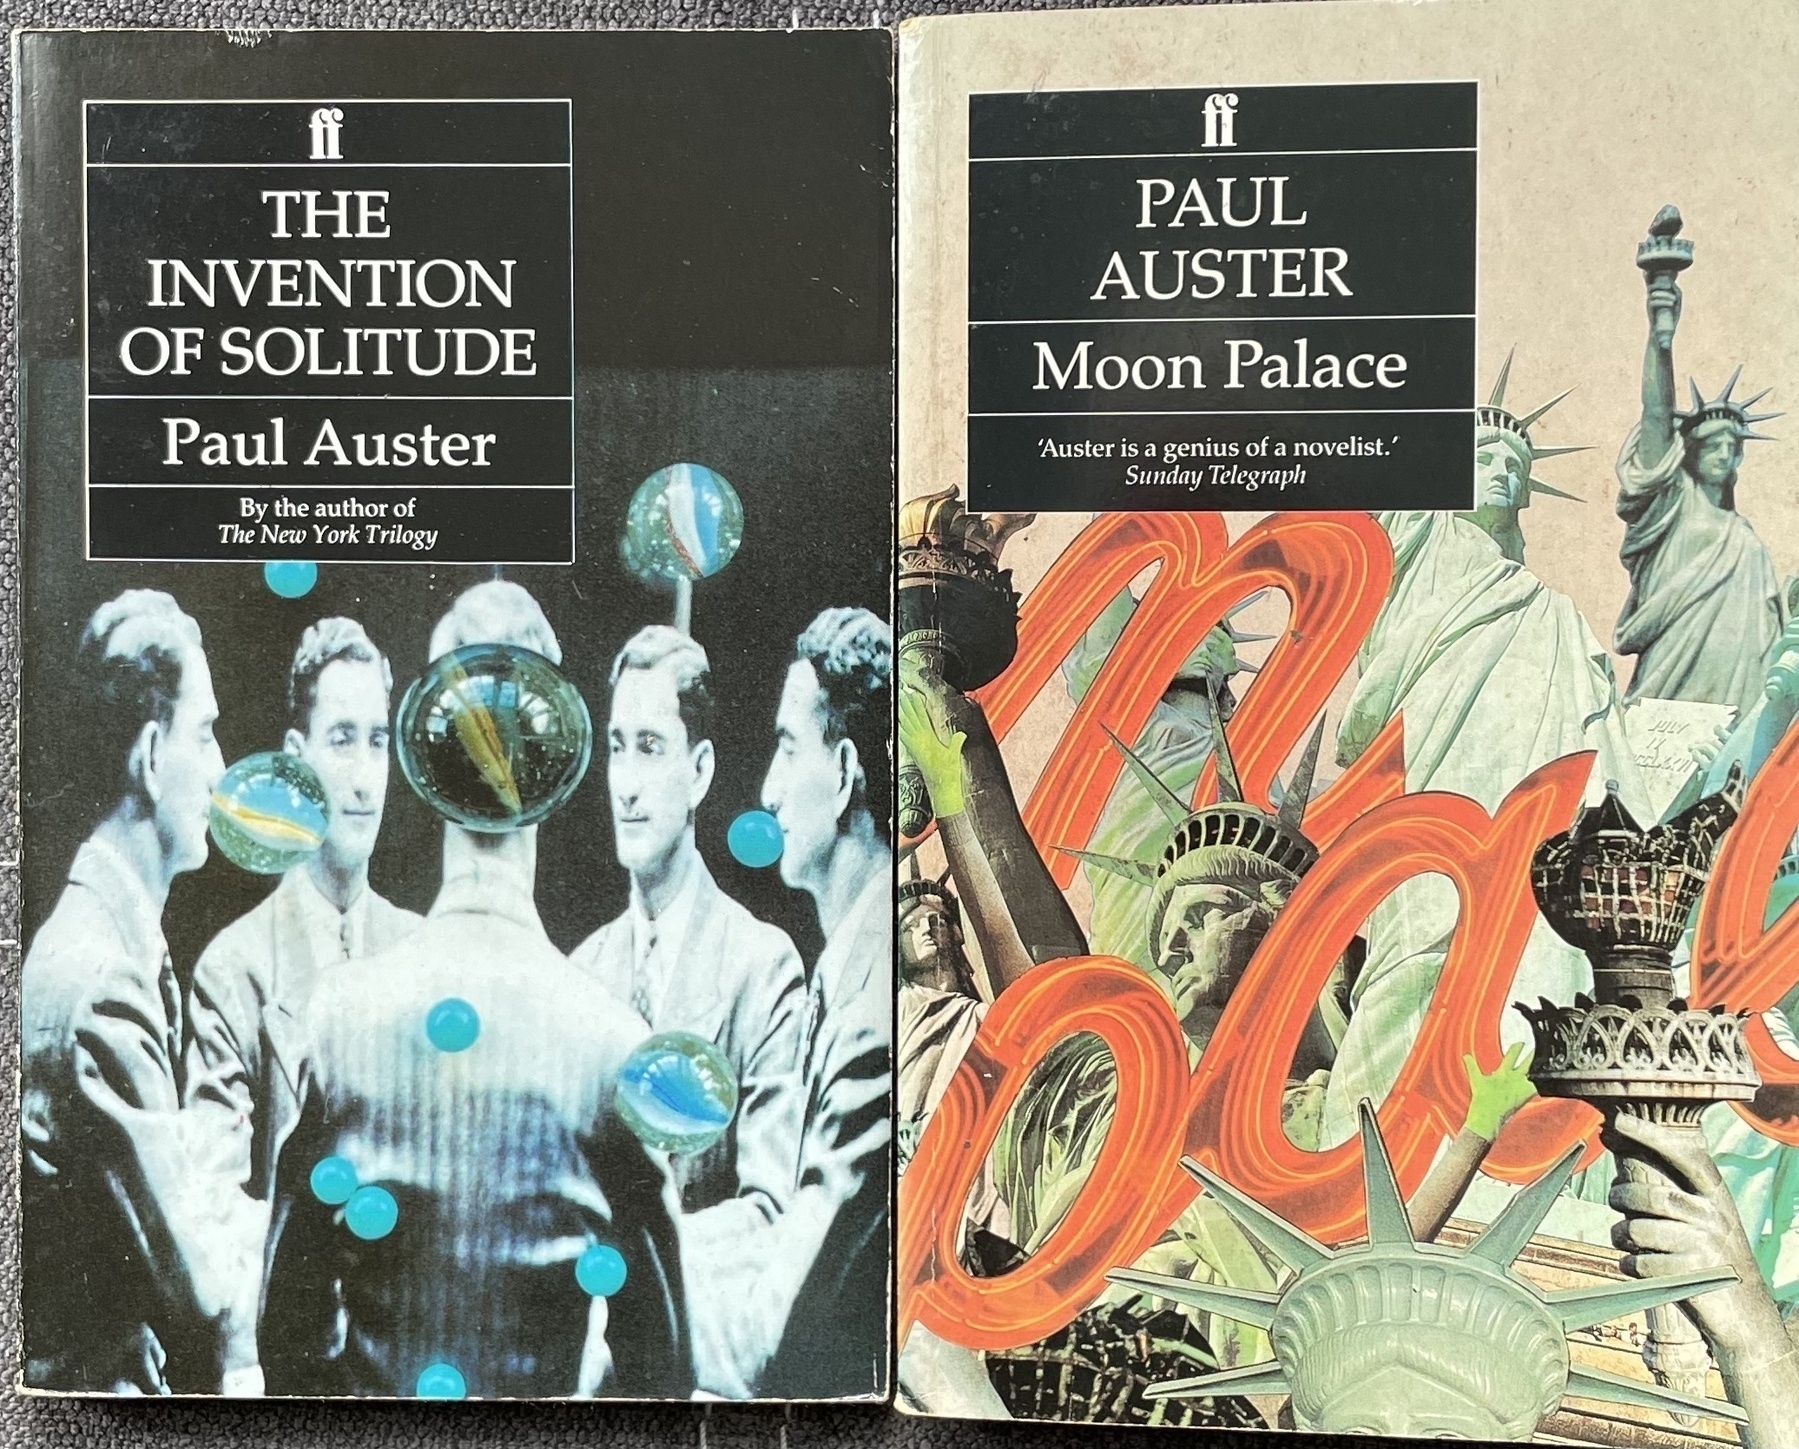 Front covers of two books by Paul Auster, The Invention of Solitude and Moon Palace